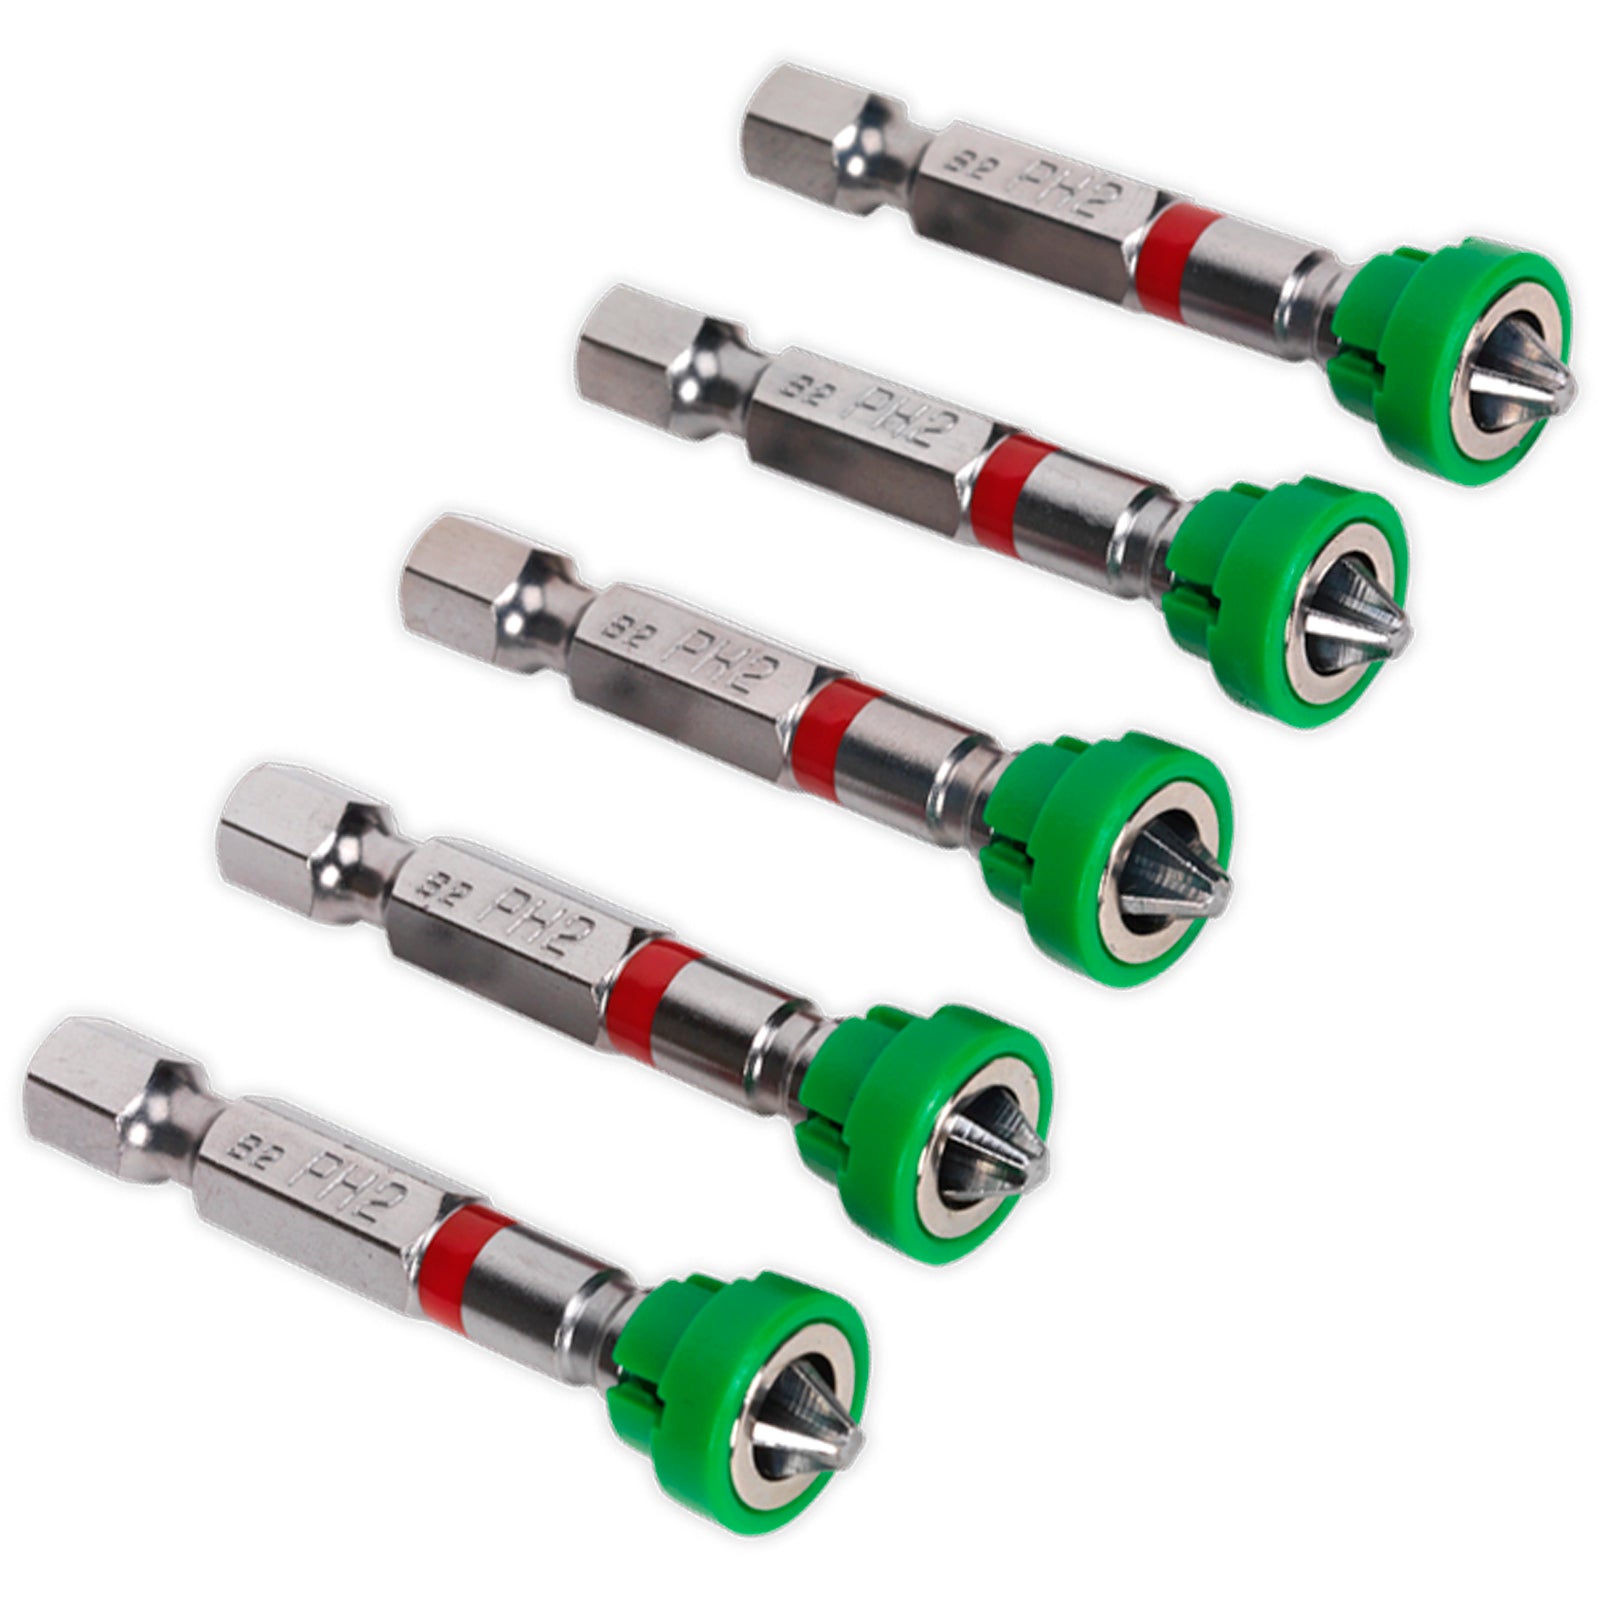 Sealey 5 Pack Power Tool Screwdriver Bits S2 Steel with Magnetic Holder